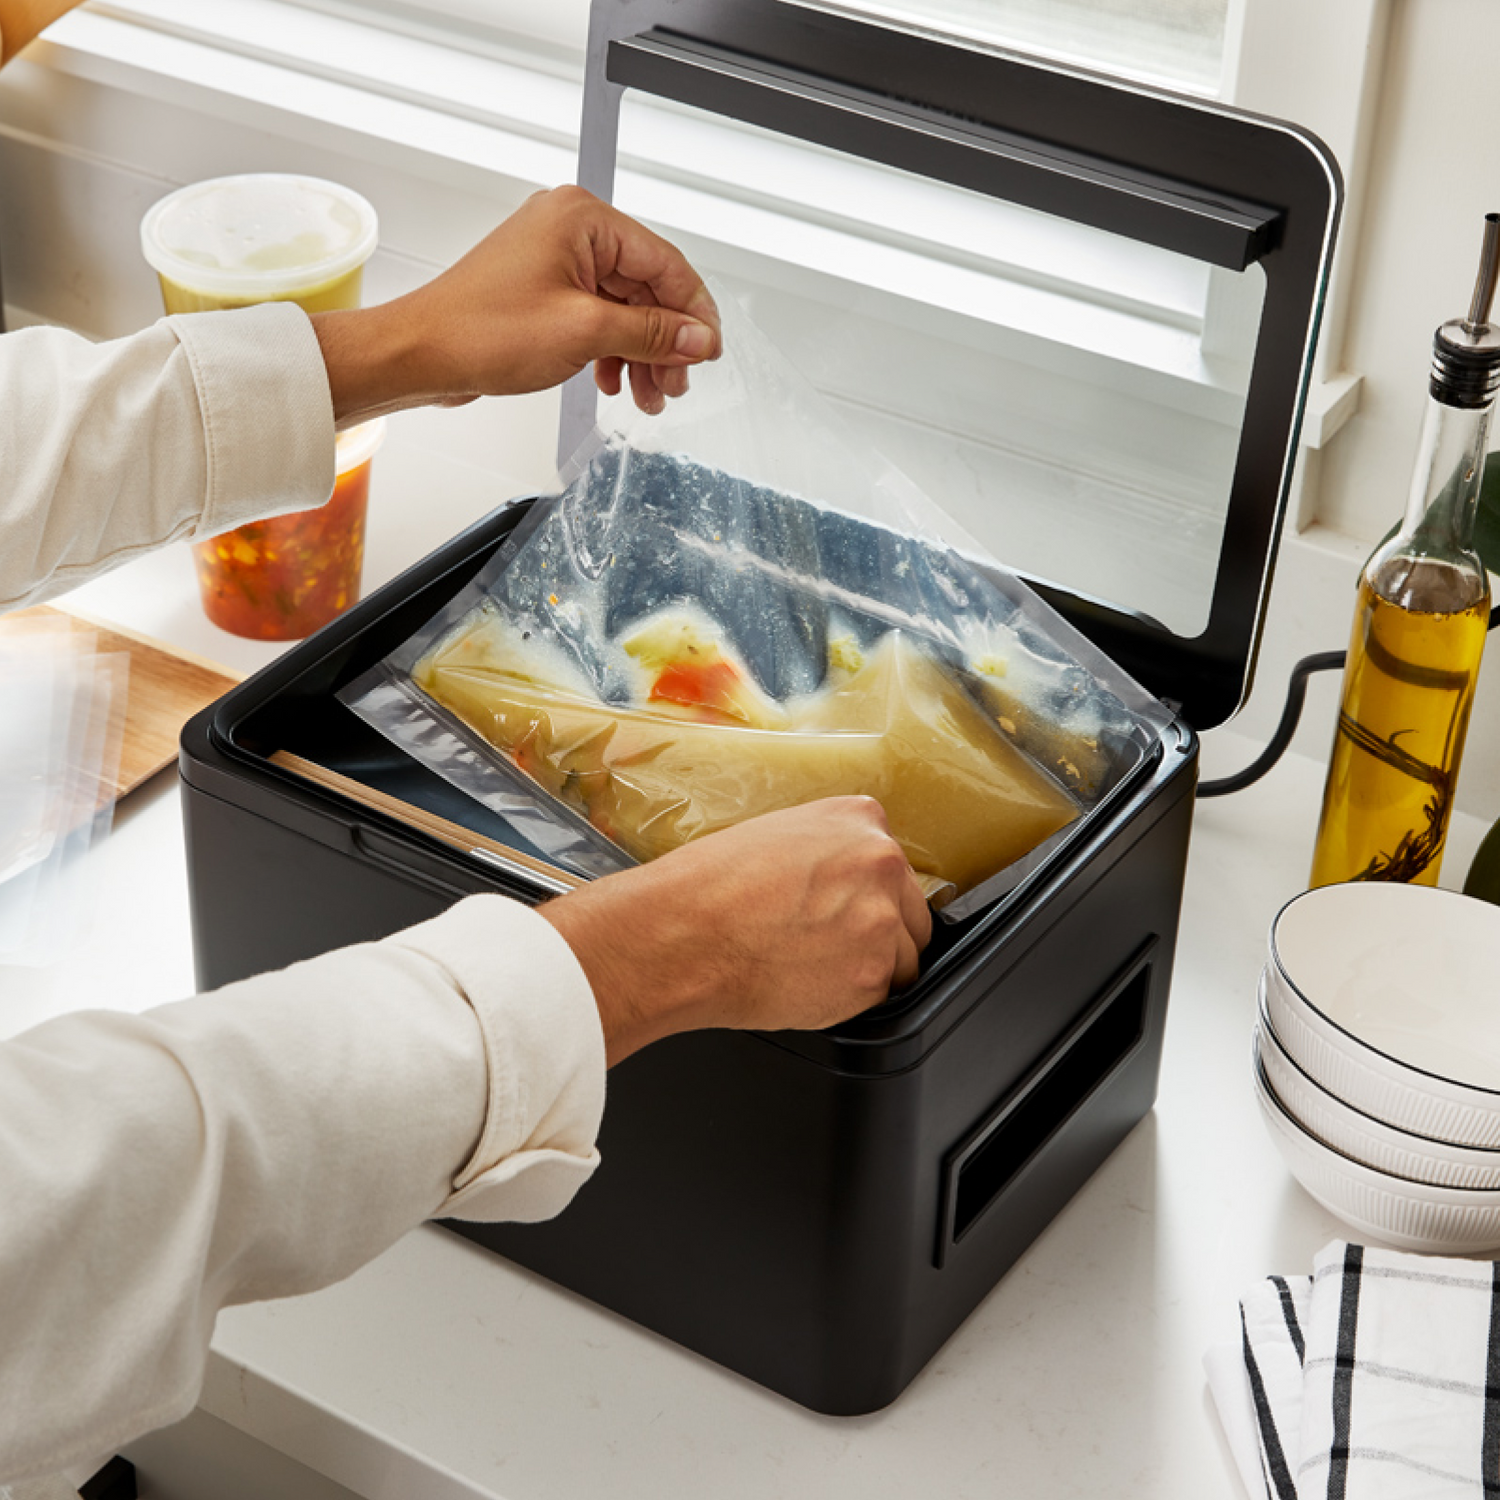 Chamber Vacuum Sealer with Oil-Less Pump